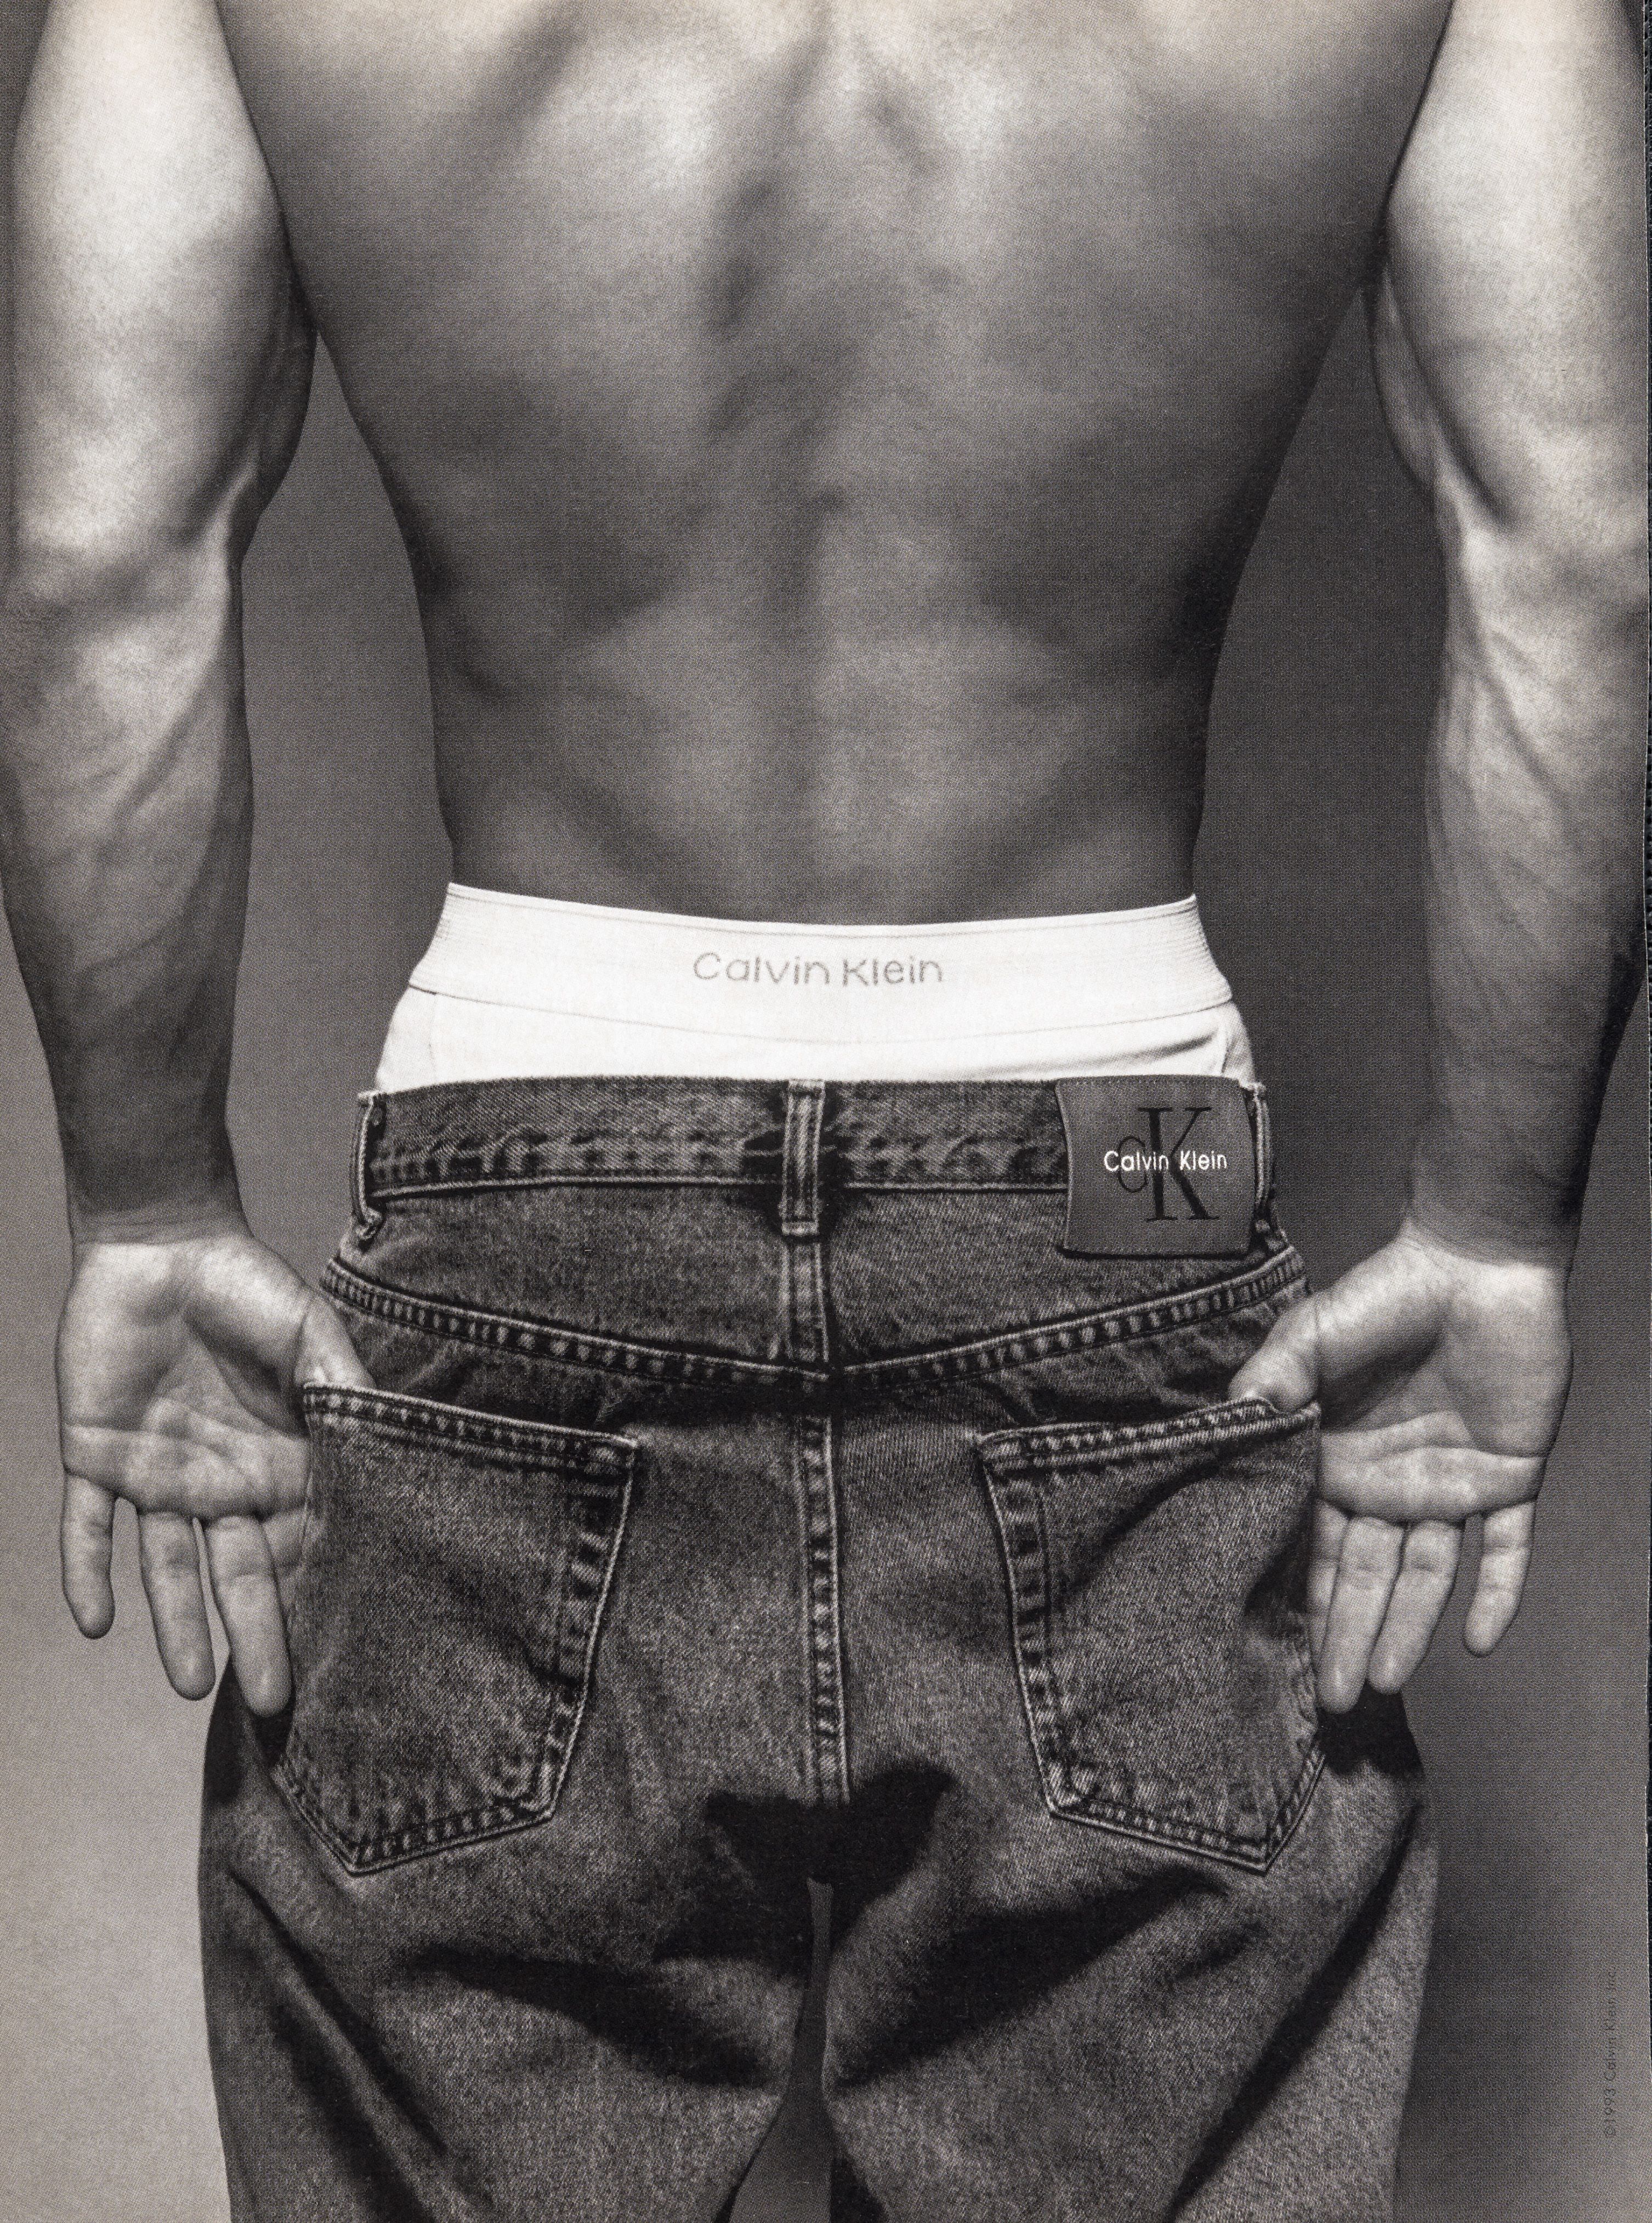 Cosmopolitan on X: 10 '90s men's underwear ads that made you ~*fEeL  tHiNgs*~   / X